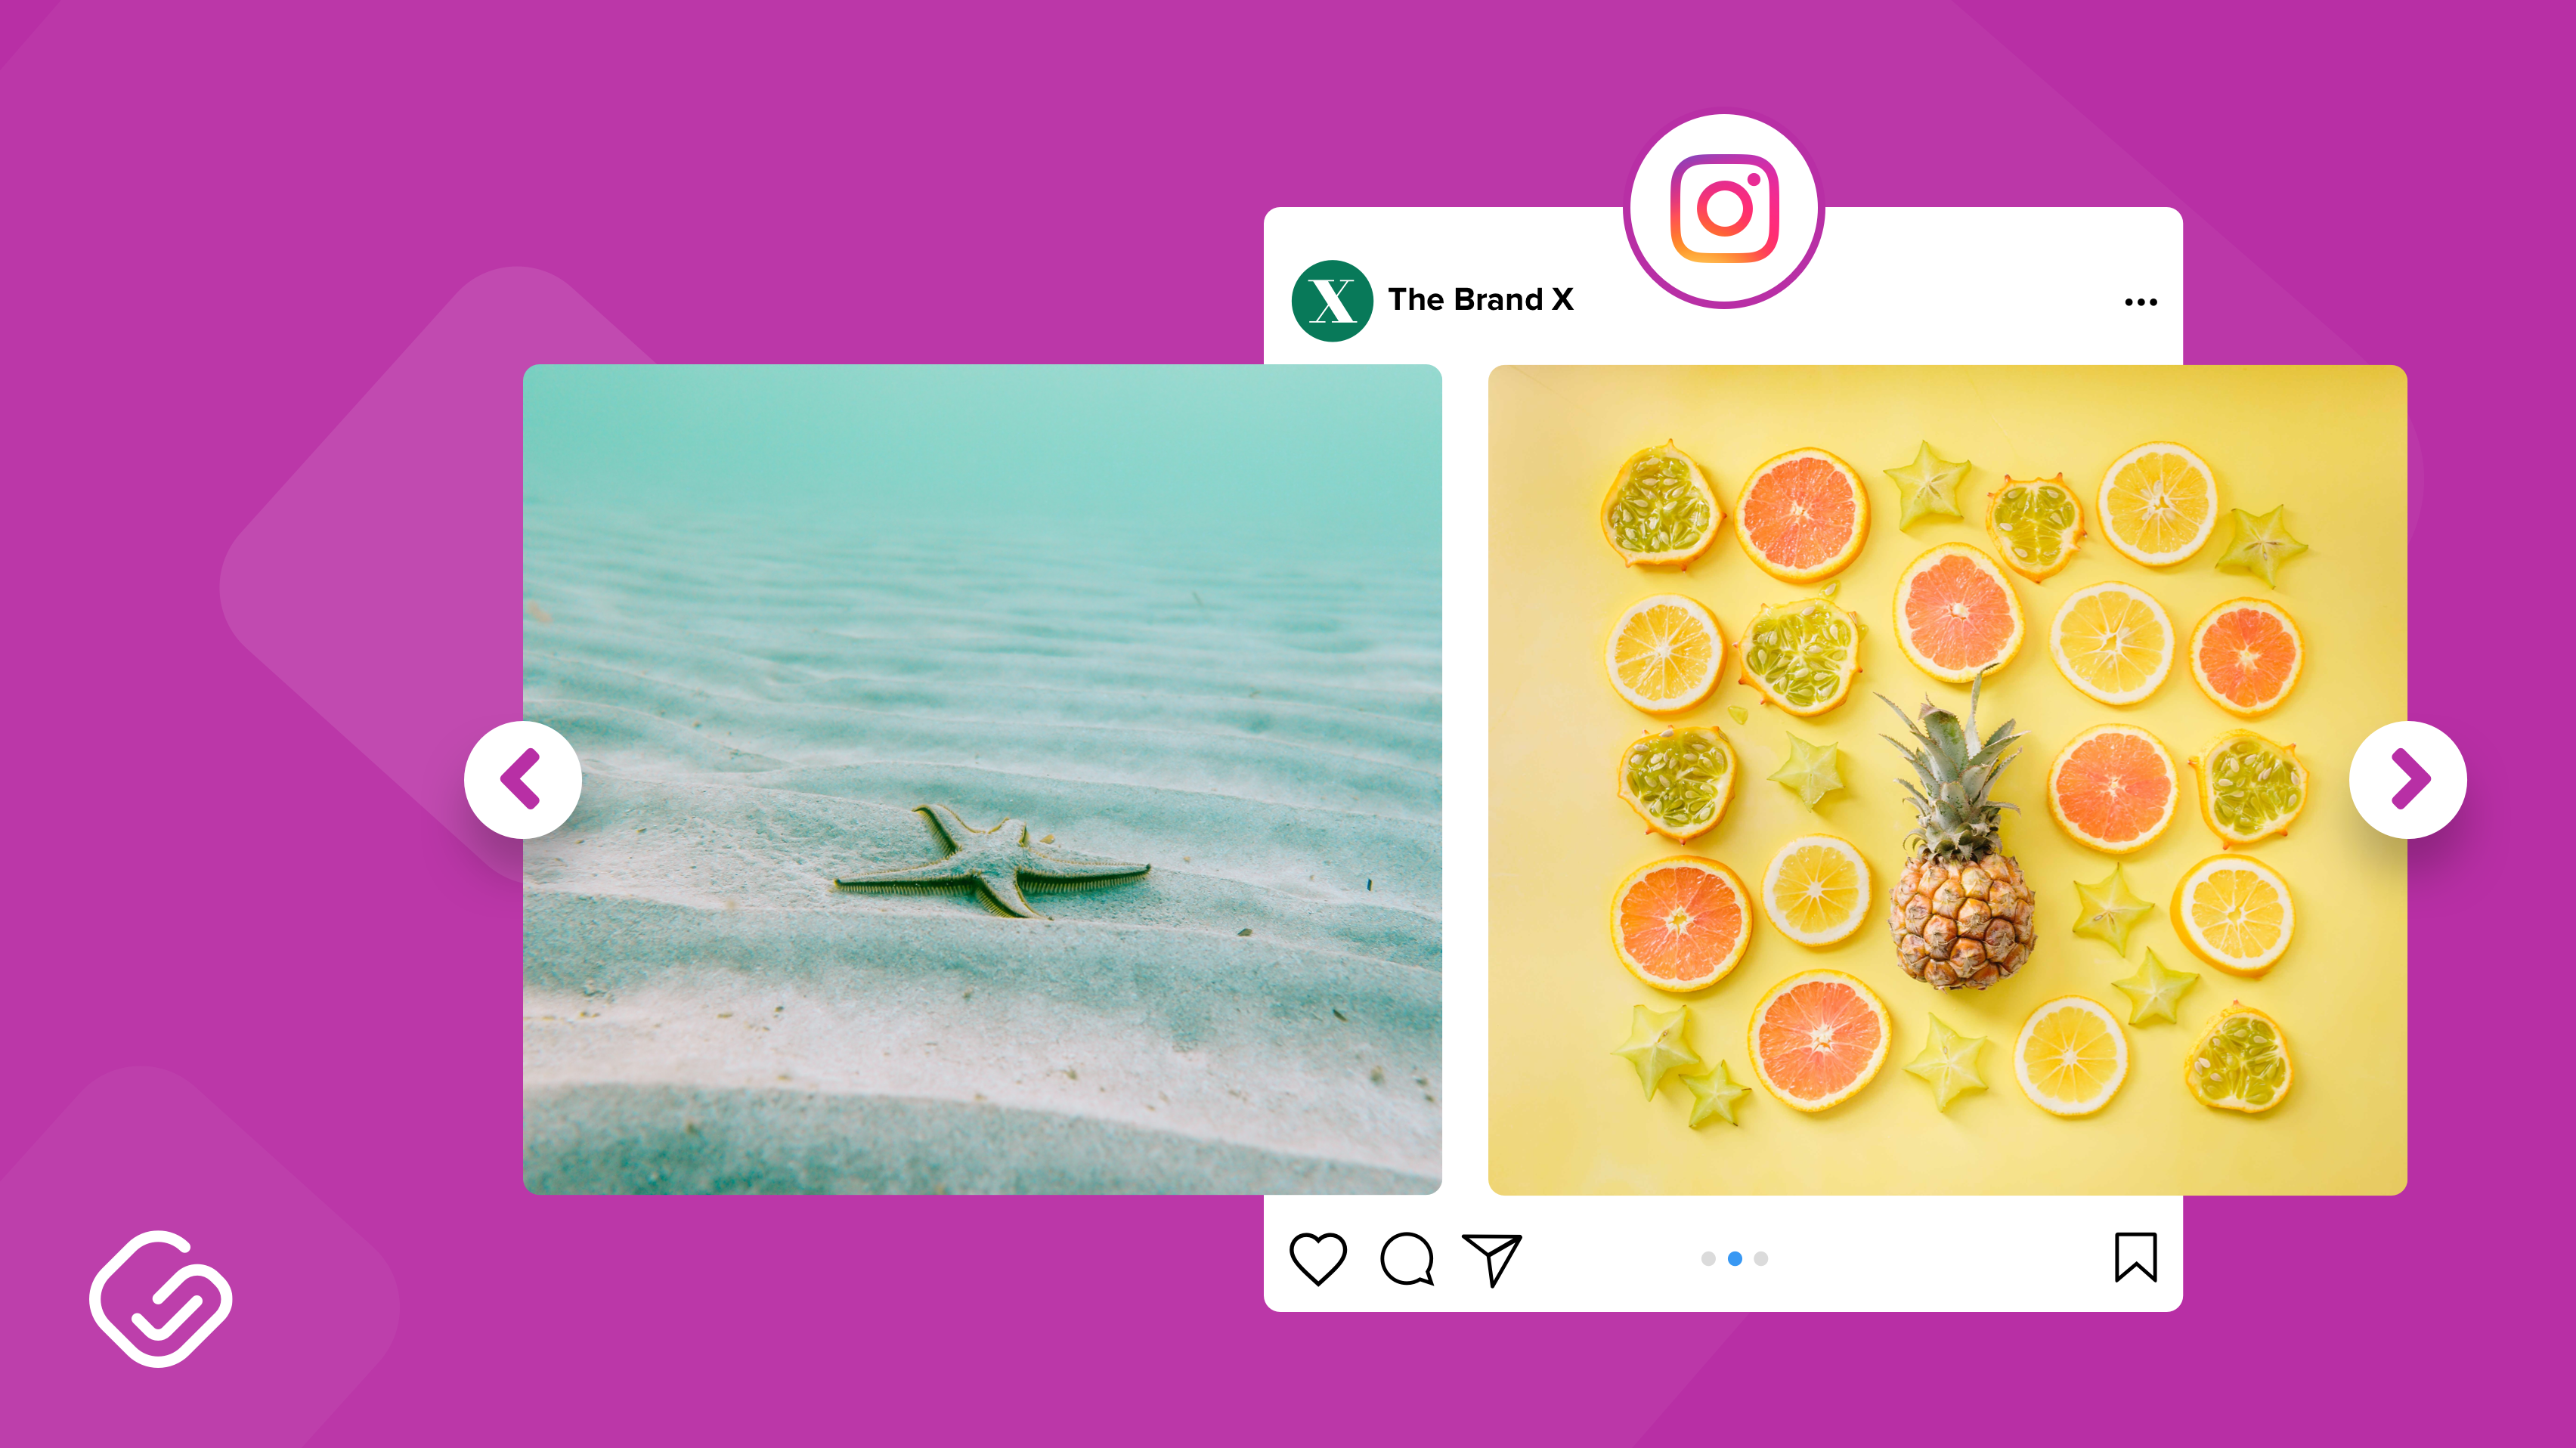 How to Post a GIF on Instagram Using a GIF-Making App